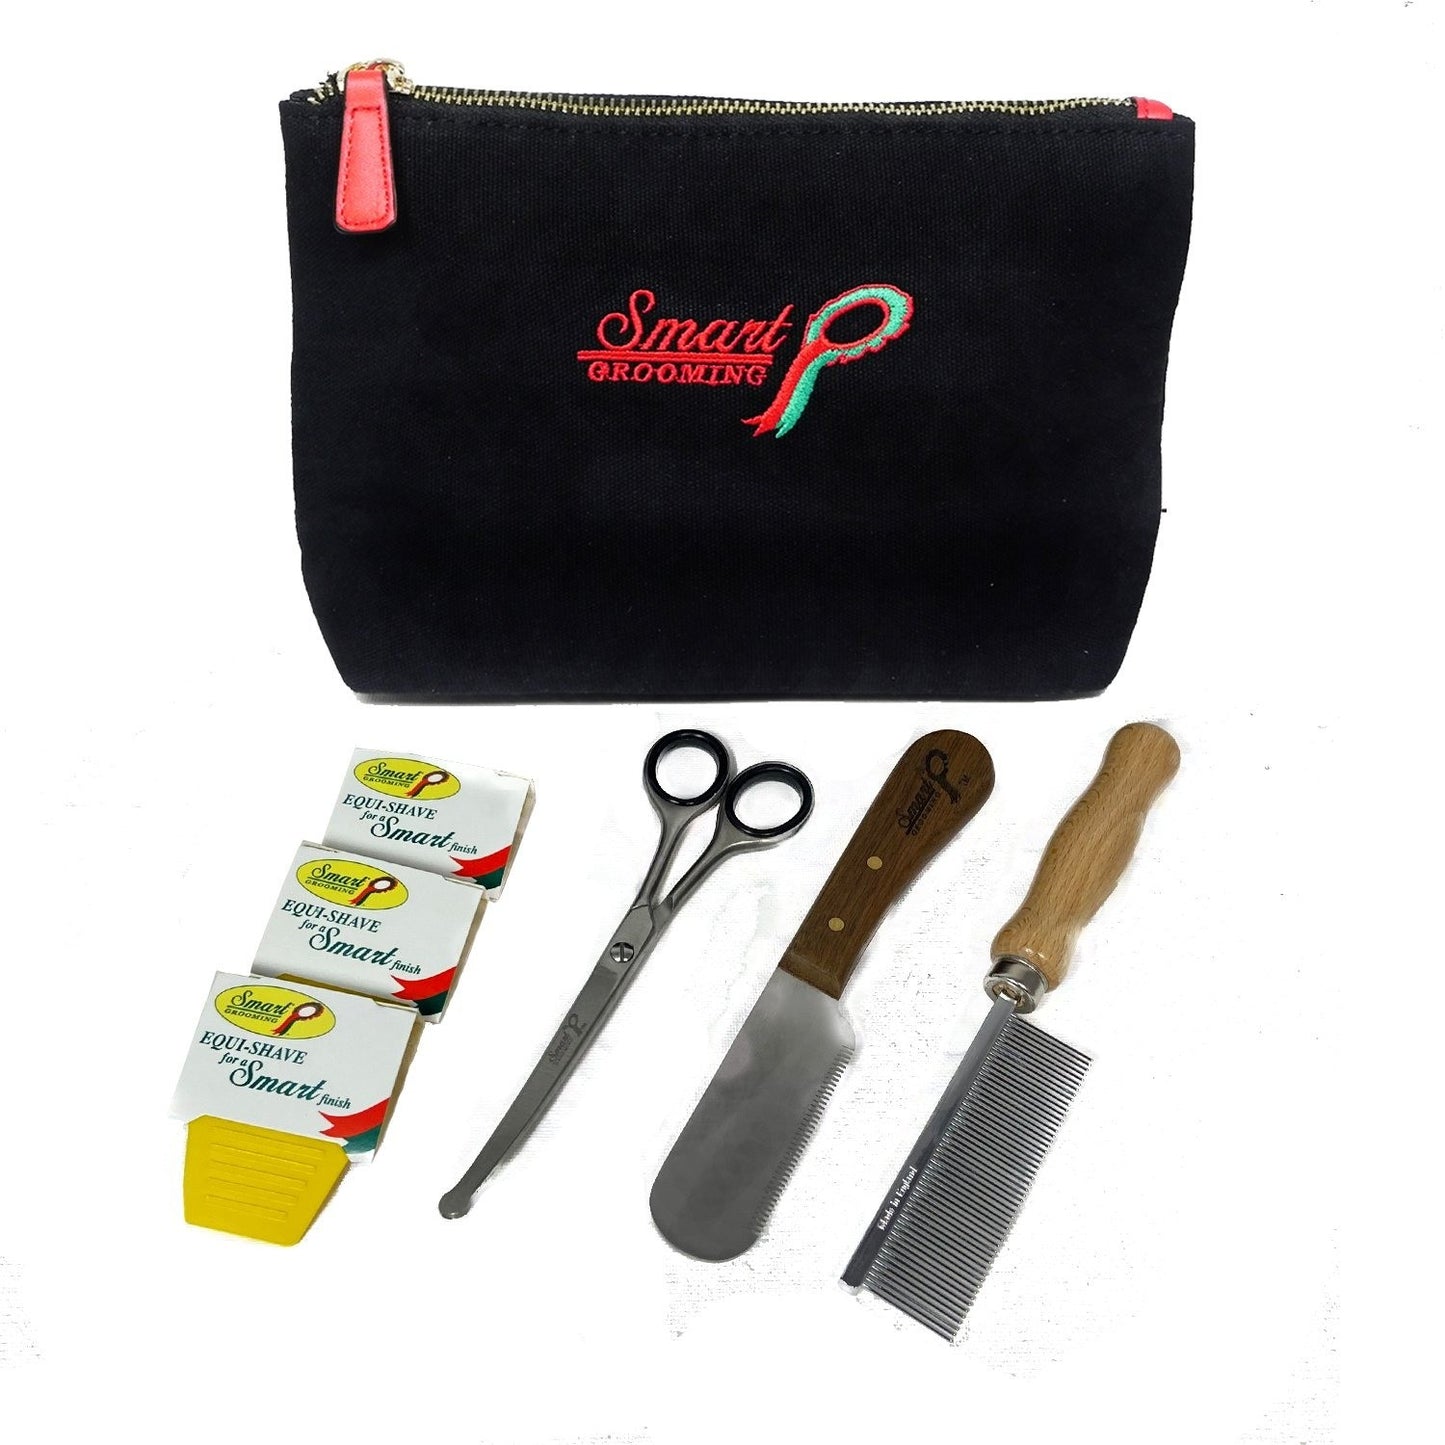 Smart Grooming Trim and Tidy Set